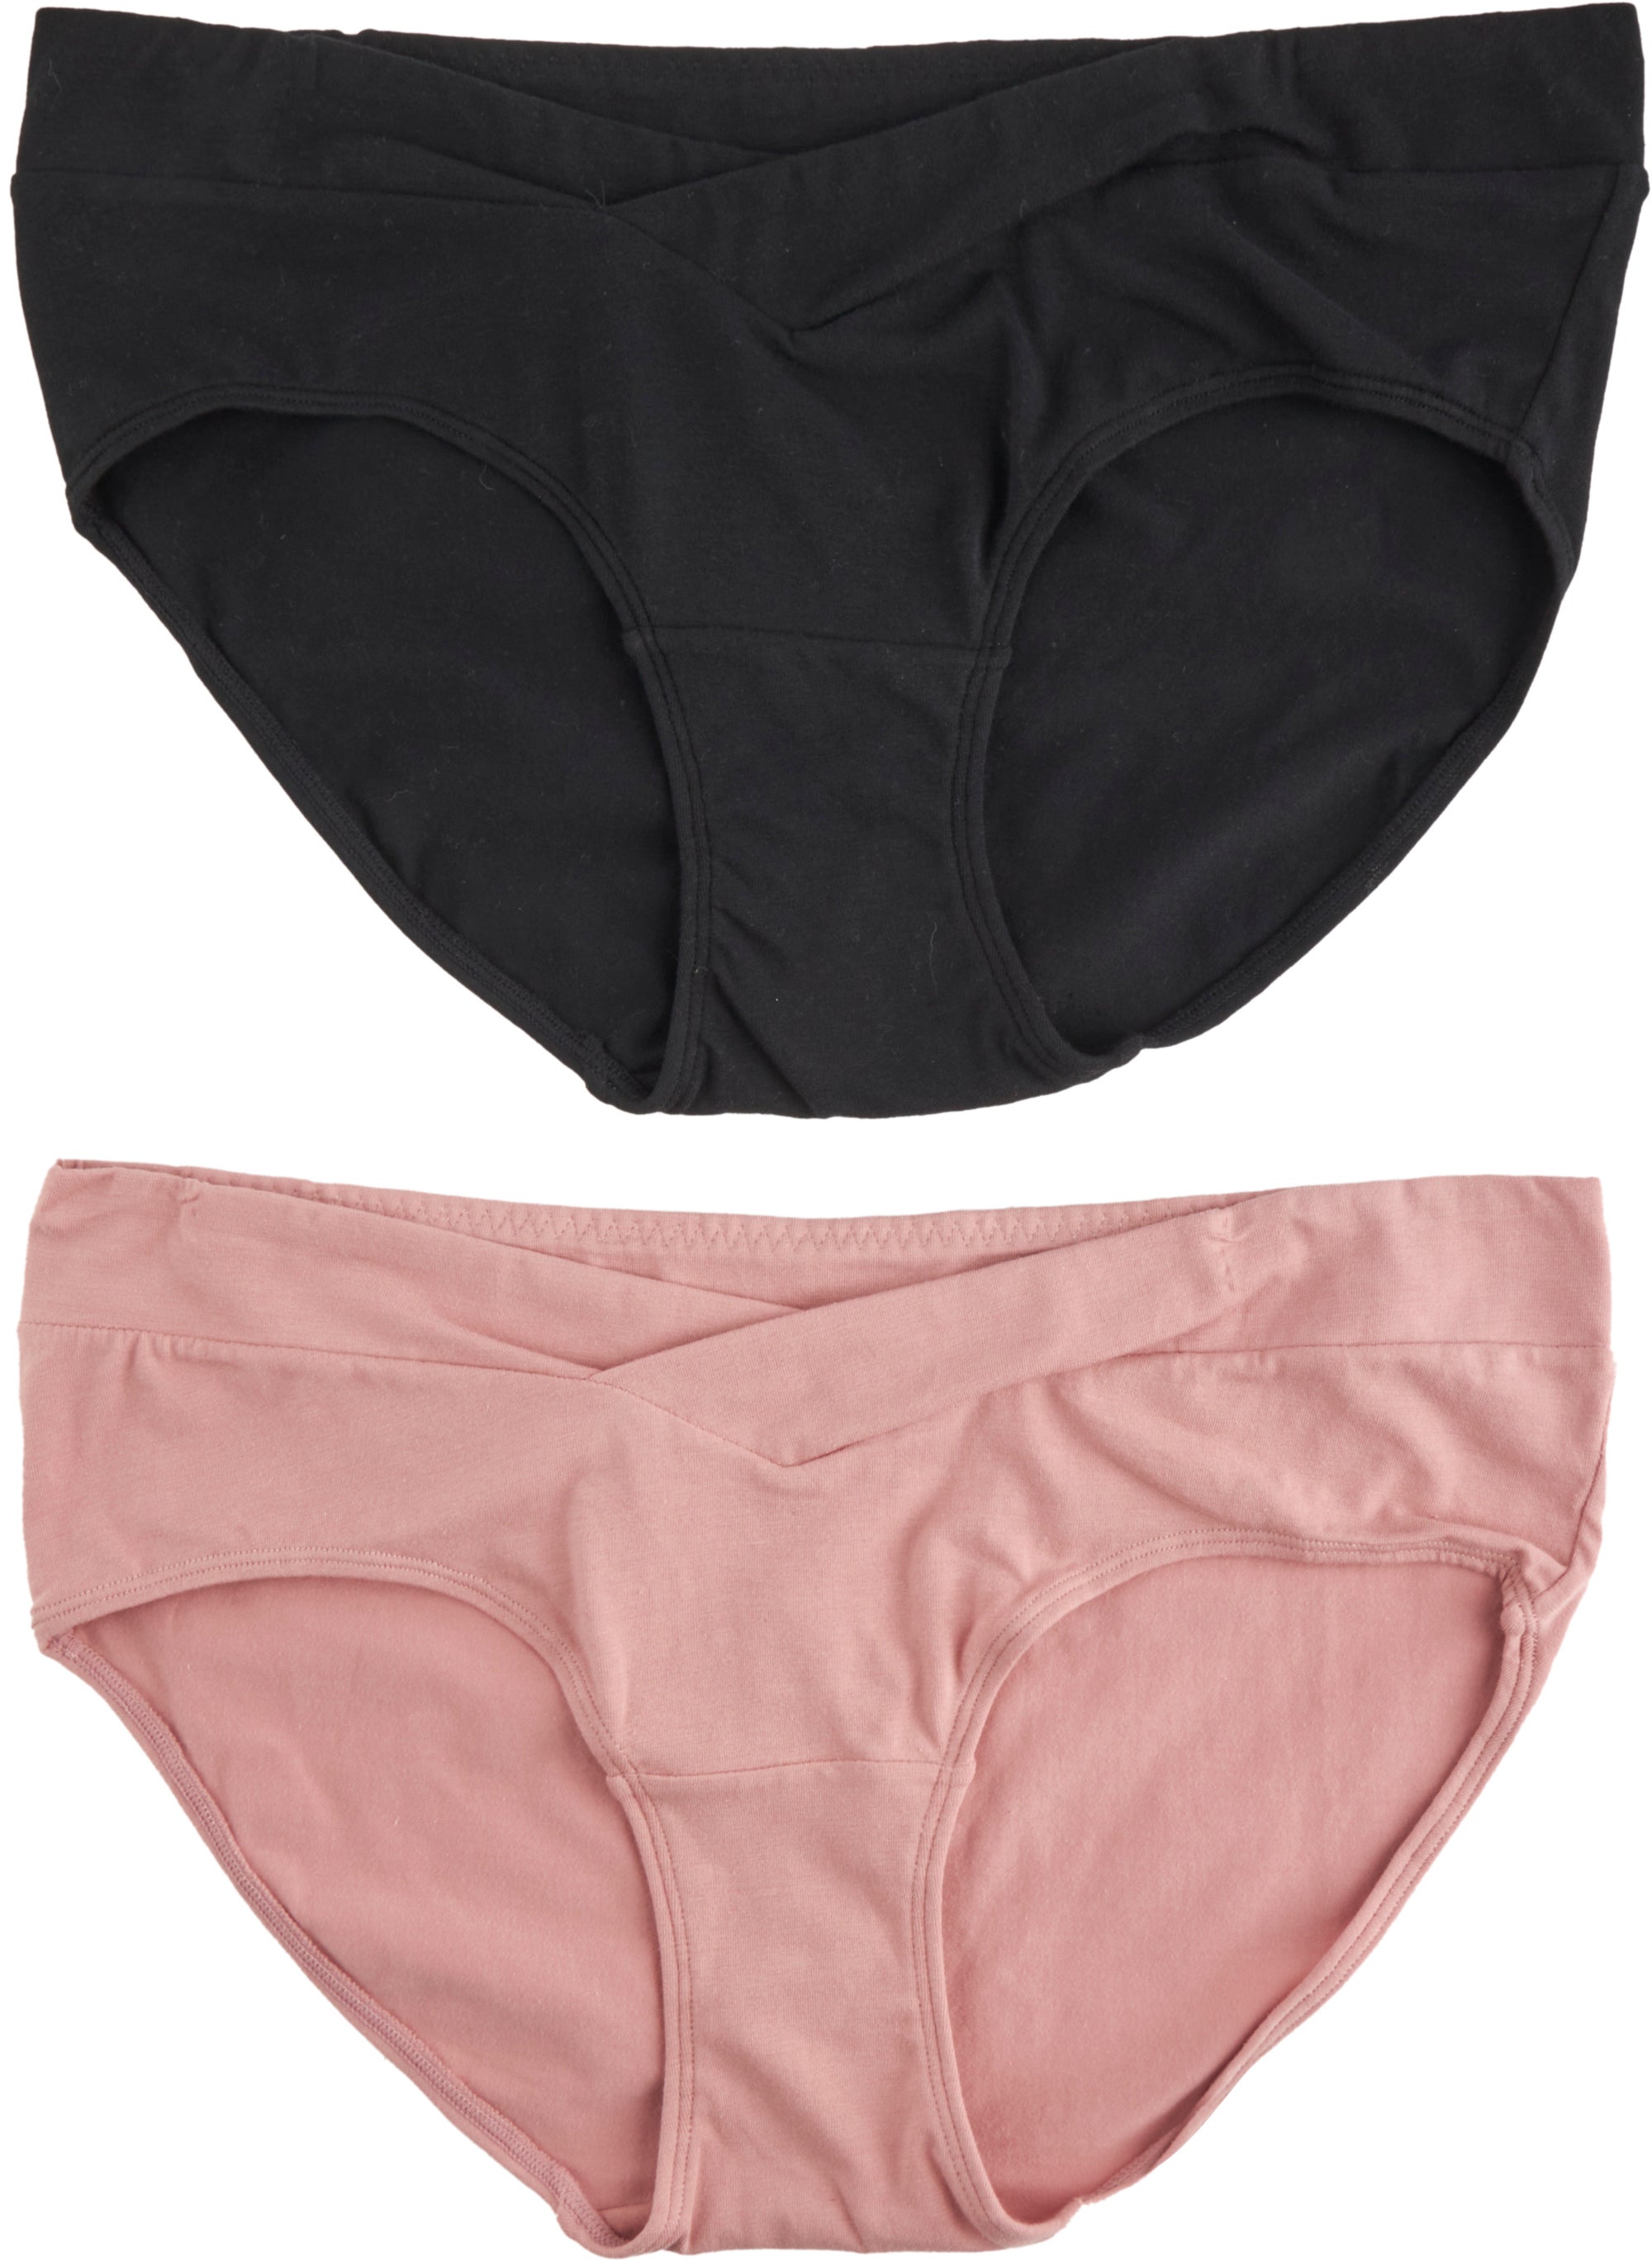 Women's Organic Cotton 2 Pack Maternity Brief in Black/rose